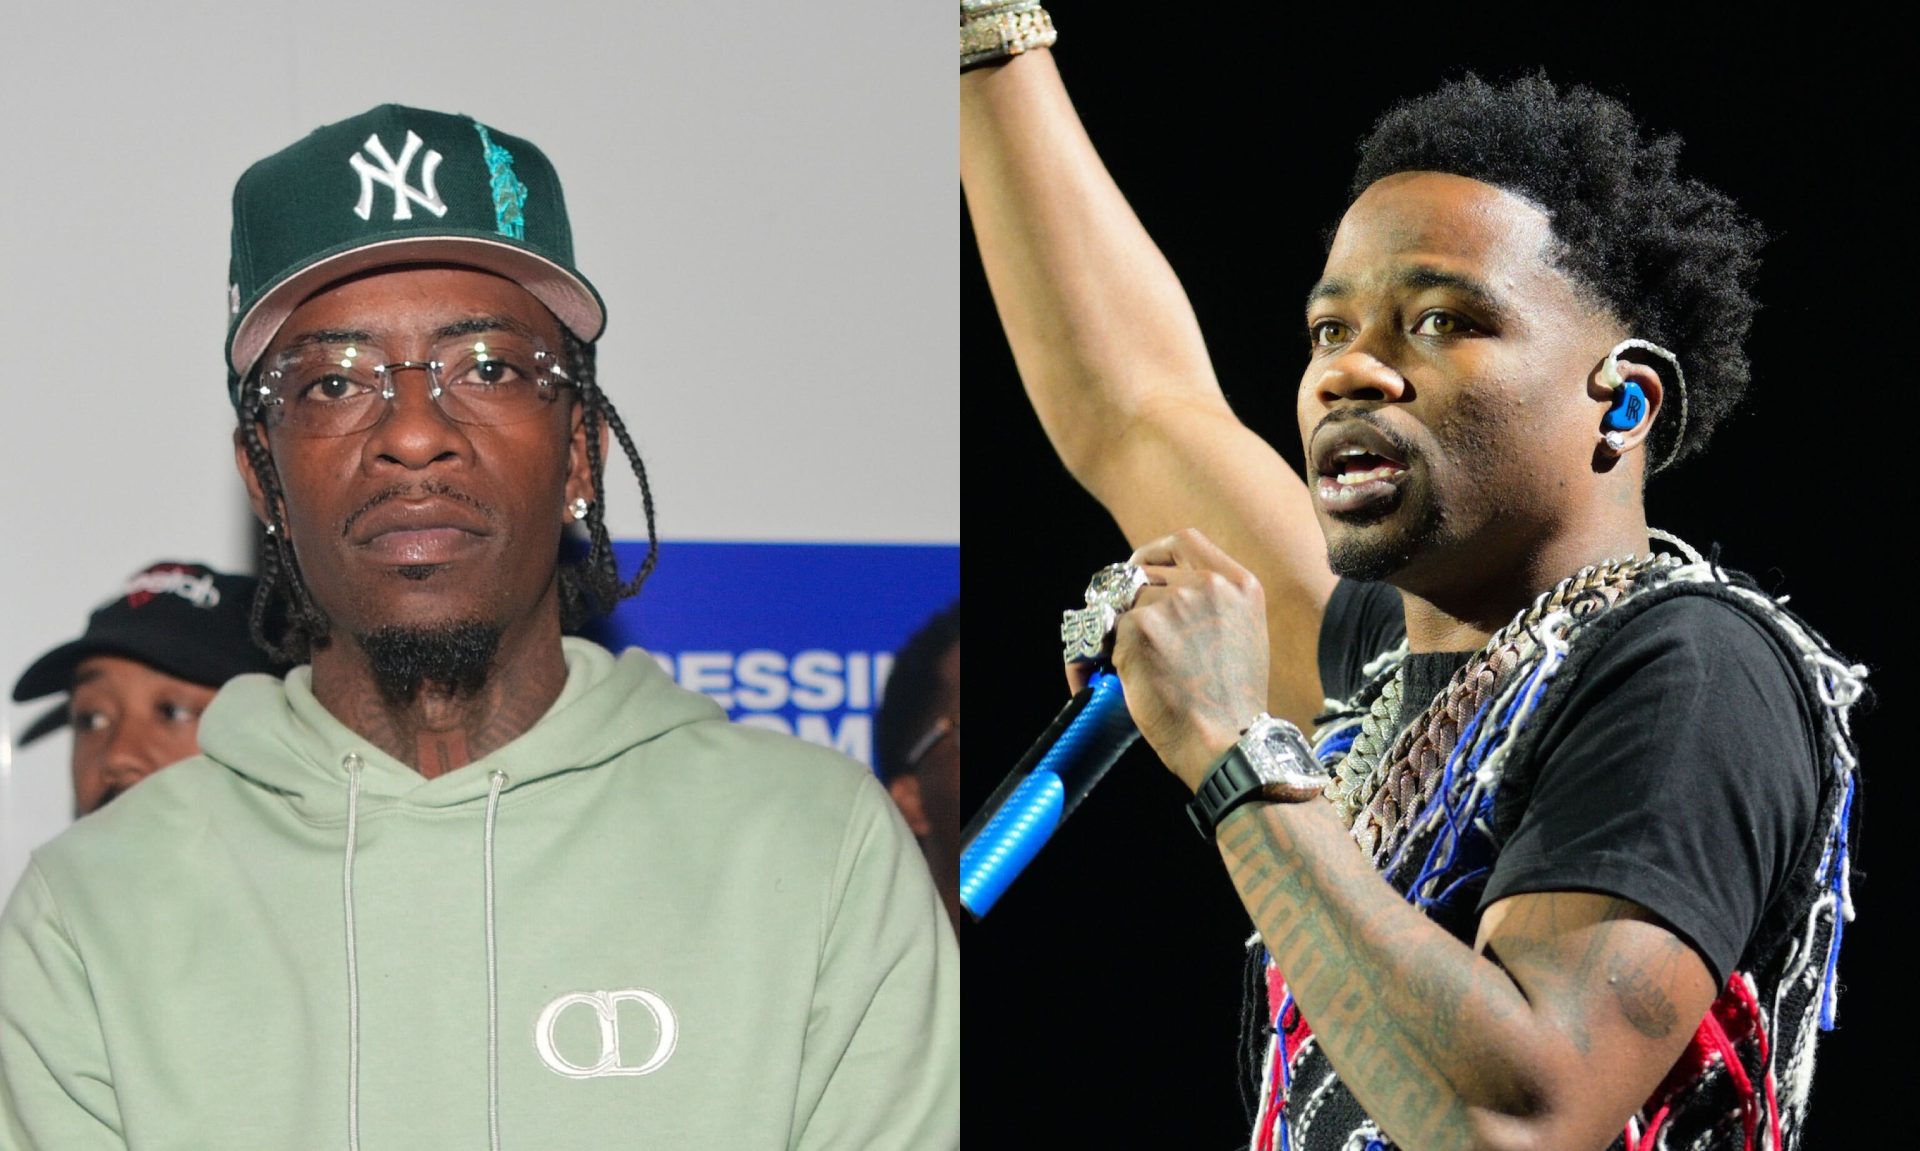 Rich Homie Quan Apologizes To Roddy Ricch After Accusing Him Of Getting His Verse Removed From ‘FMFU’